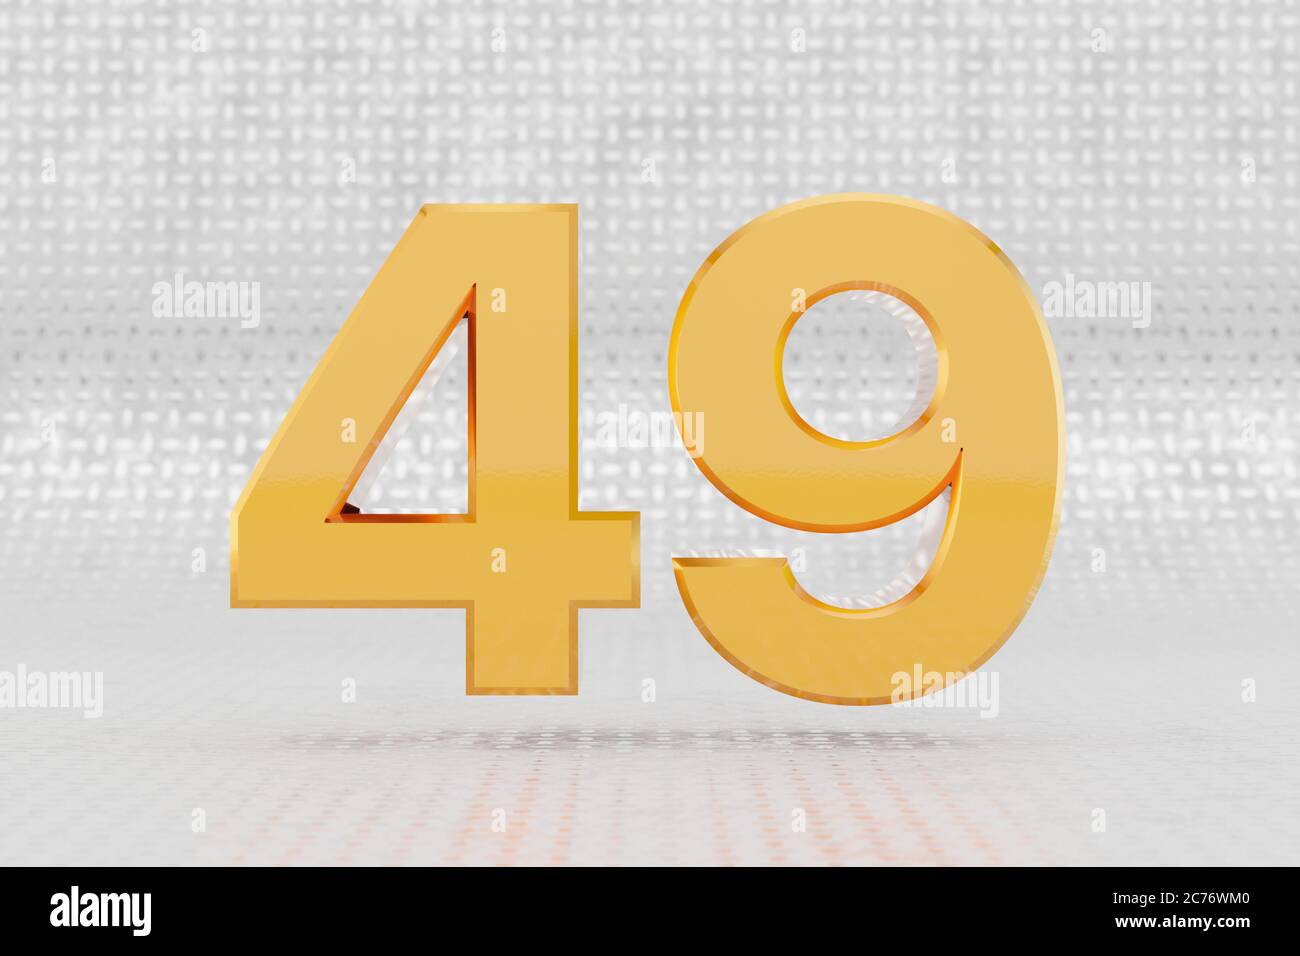 Yellow 3d number 49. Glossy yellow metallic number on metal floor background. Shiny gold metal alphabet with studio light reflections. 3d rendered font character. Stock Photo